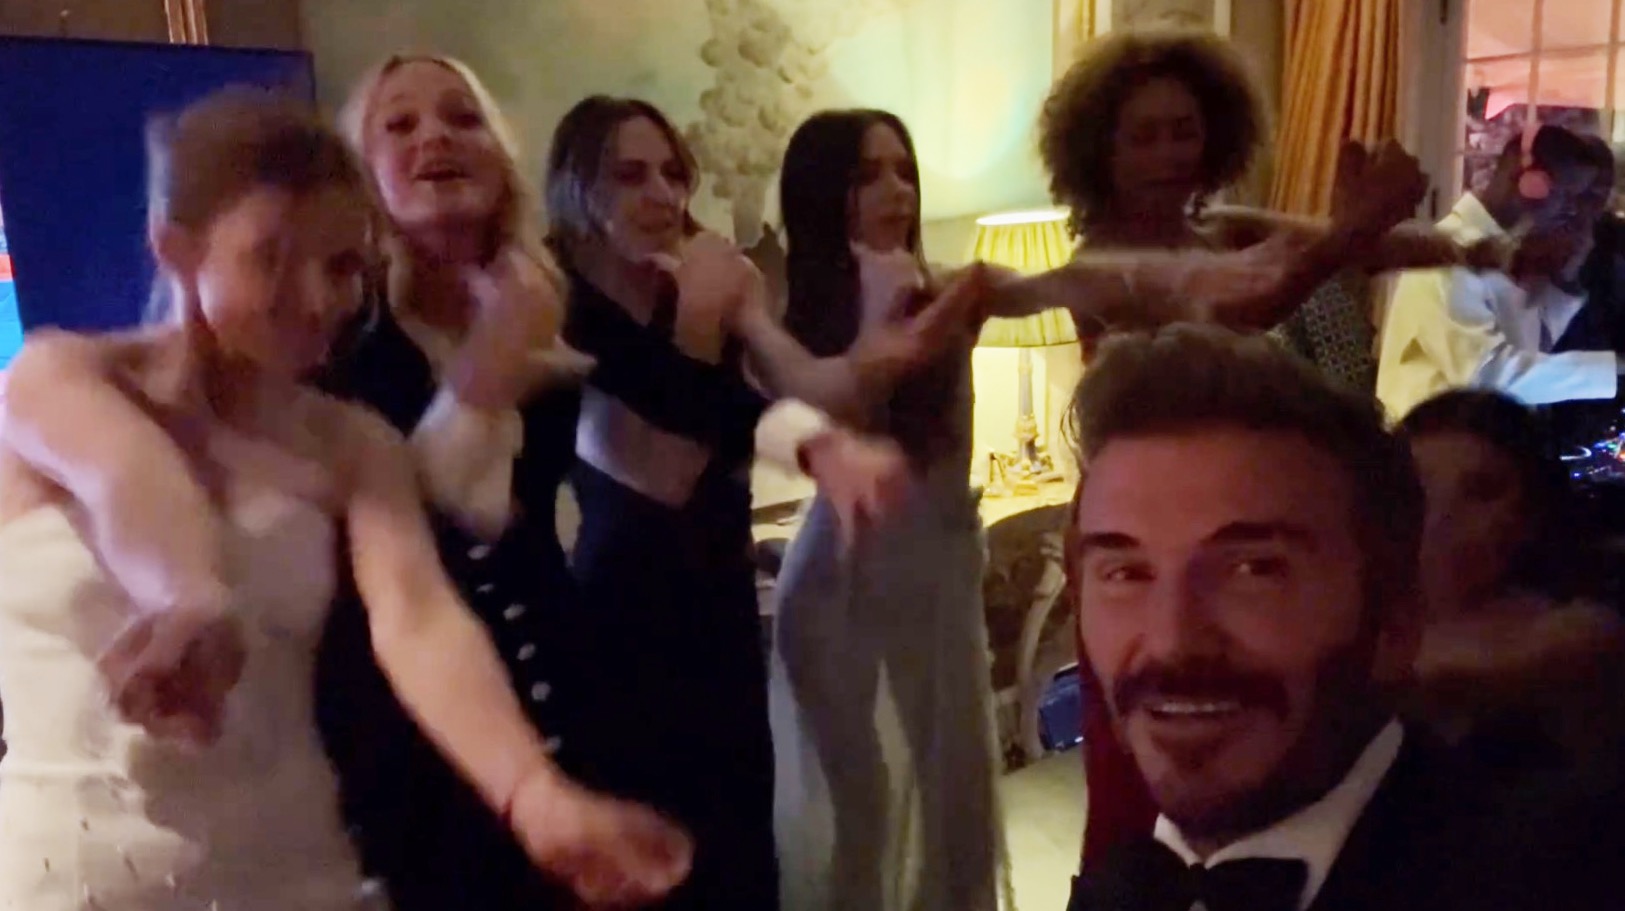 The Spice Girls perform Stop at the party, much to the delight of hubbie David